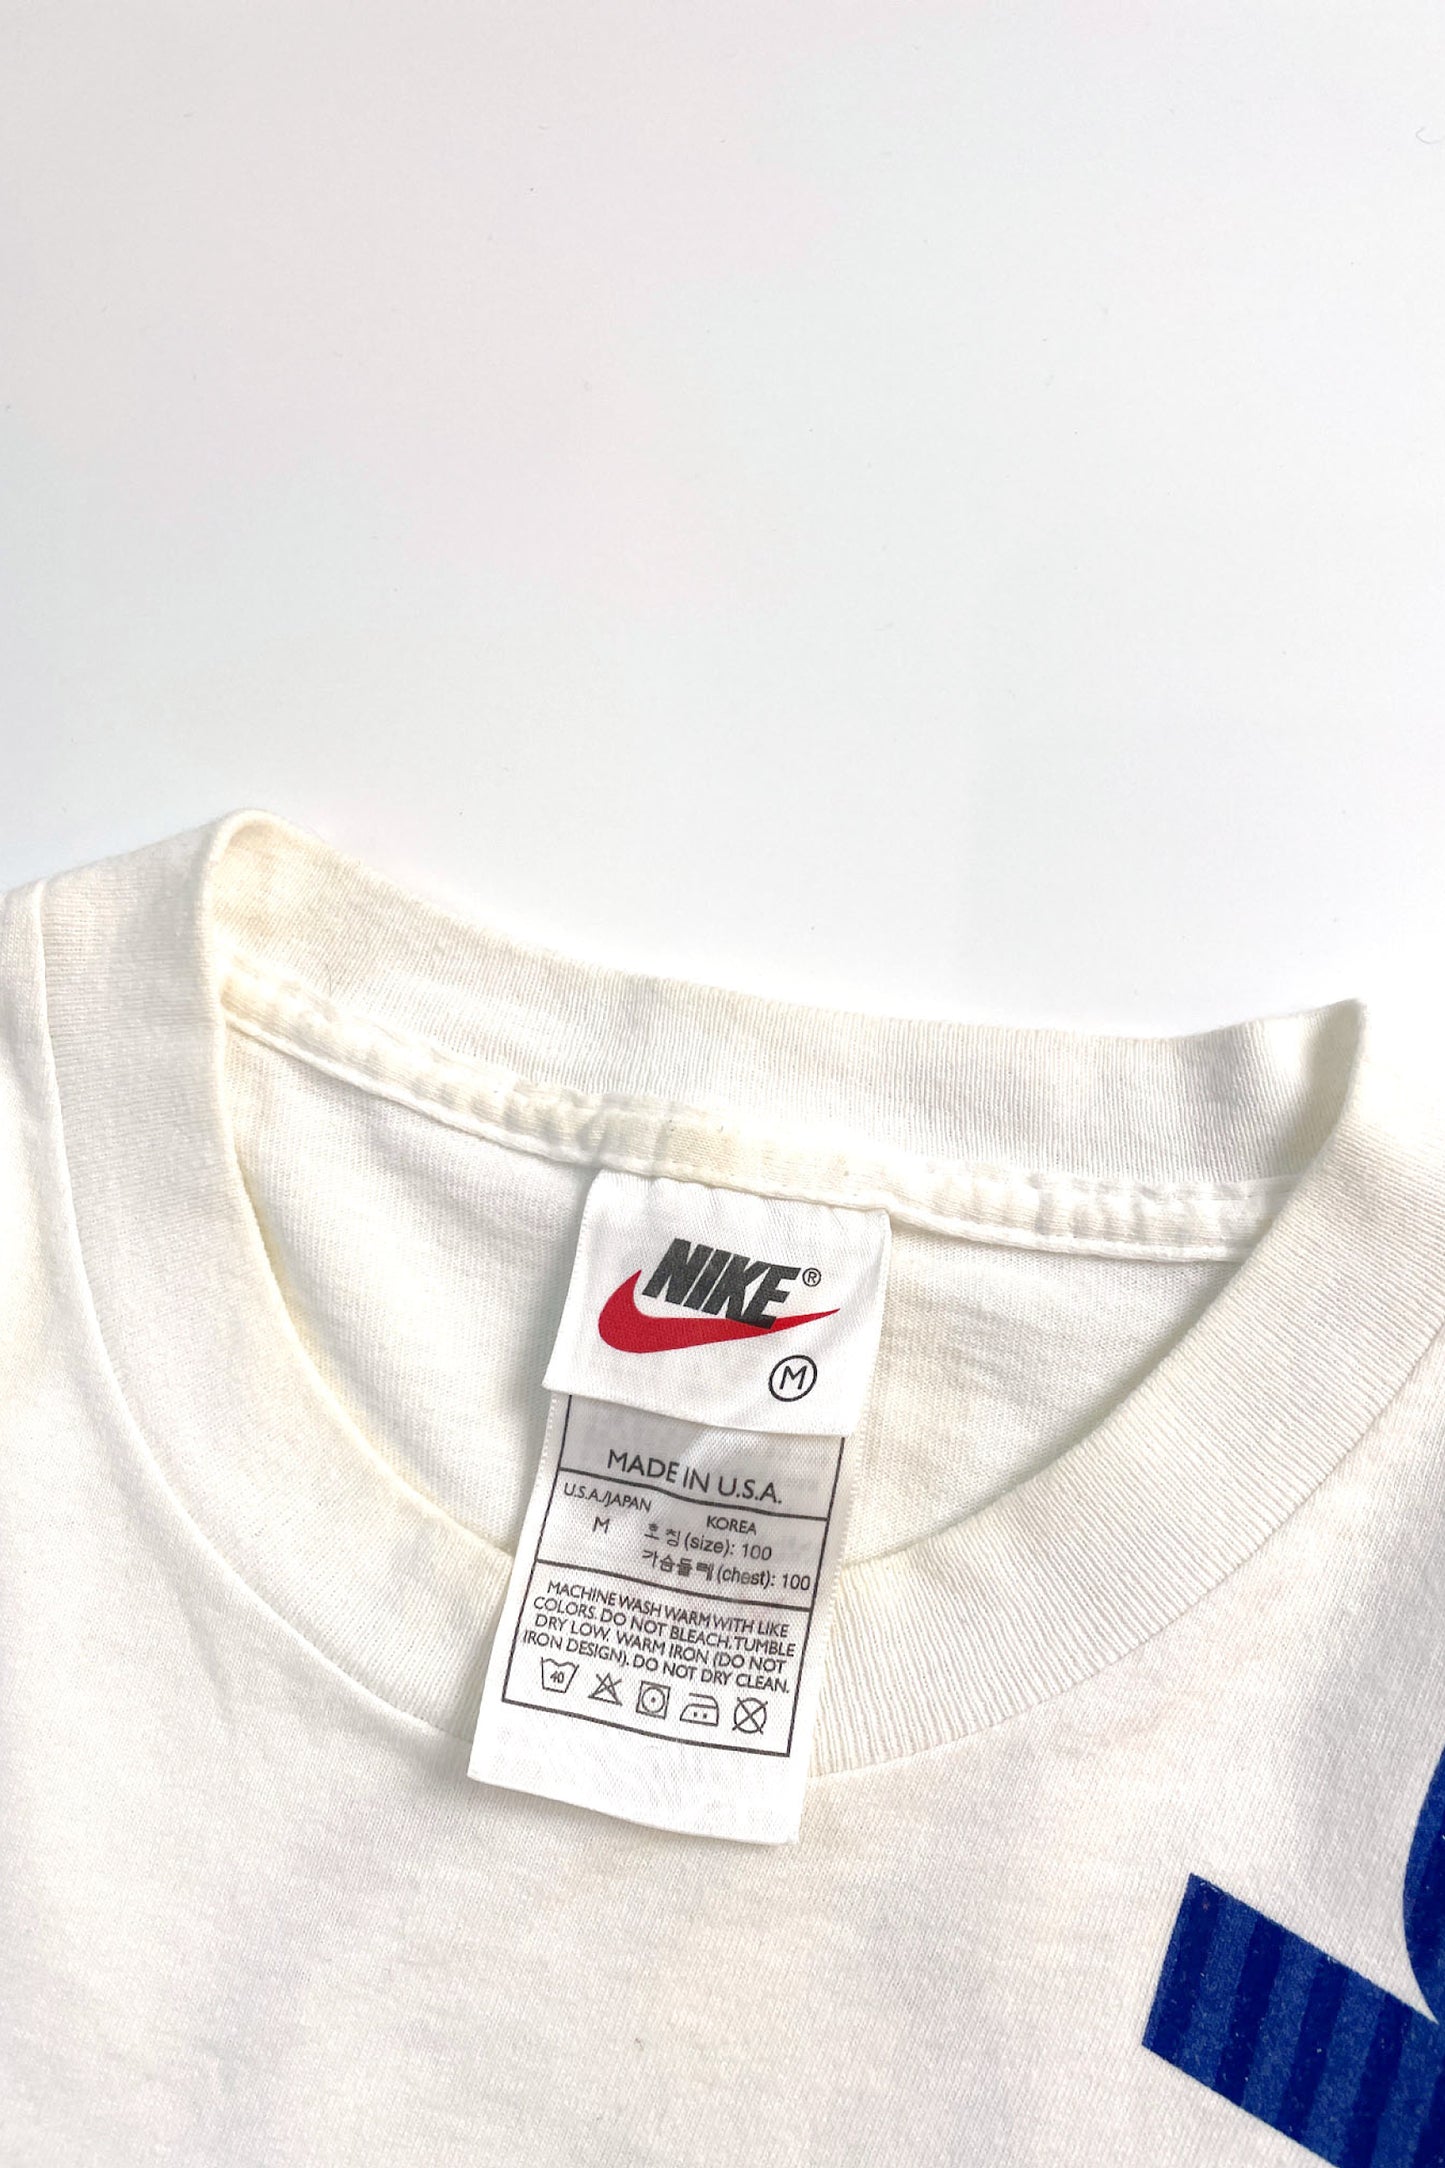 90's 00's Made in USA NIKE T-shirt